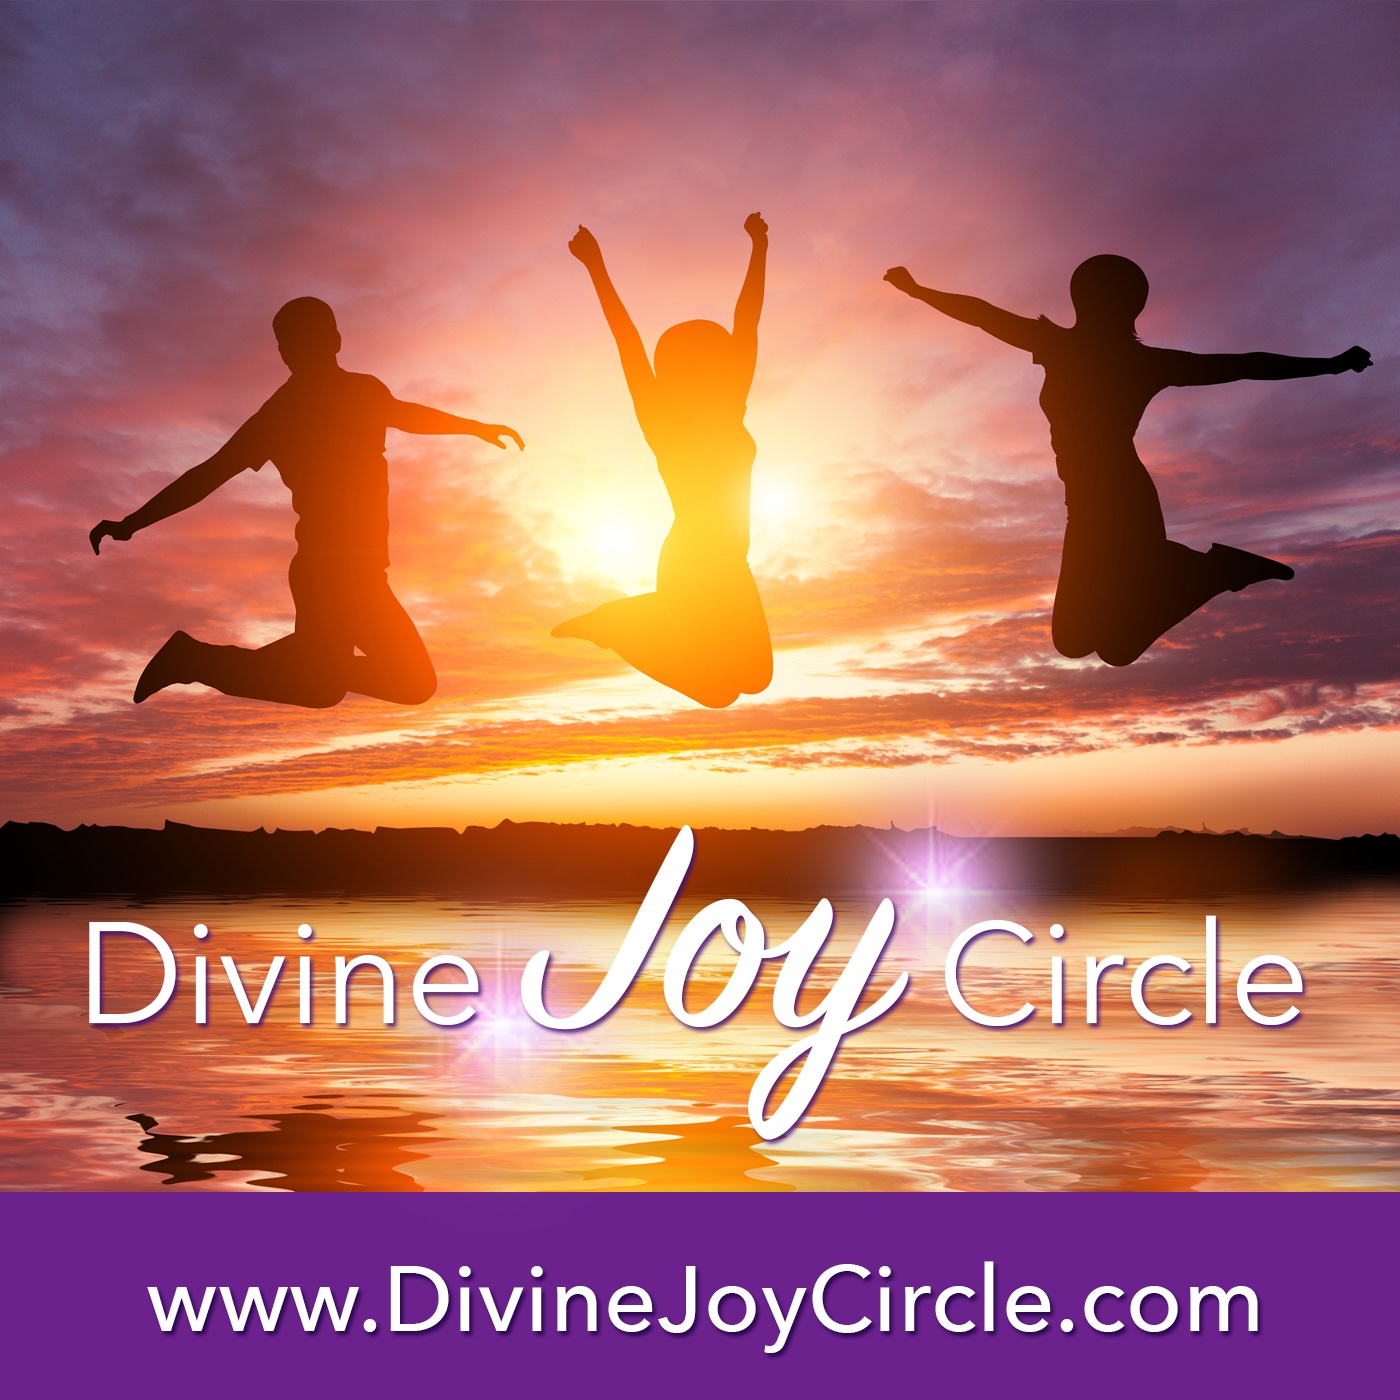 Welcome to the Divine Joy Circle Podcast